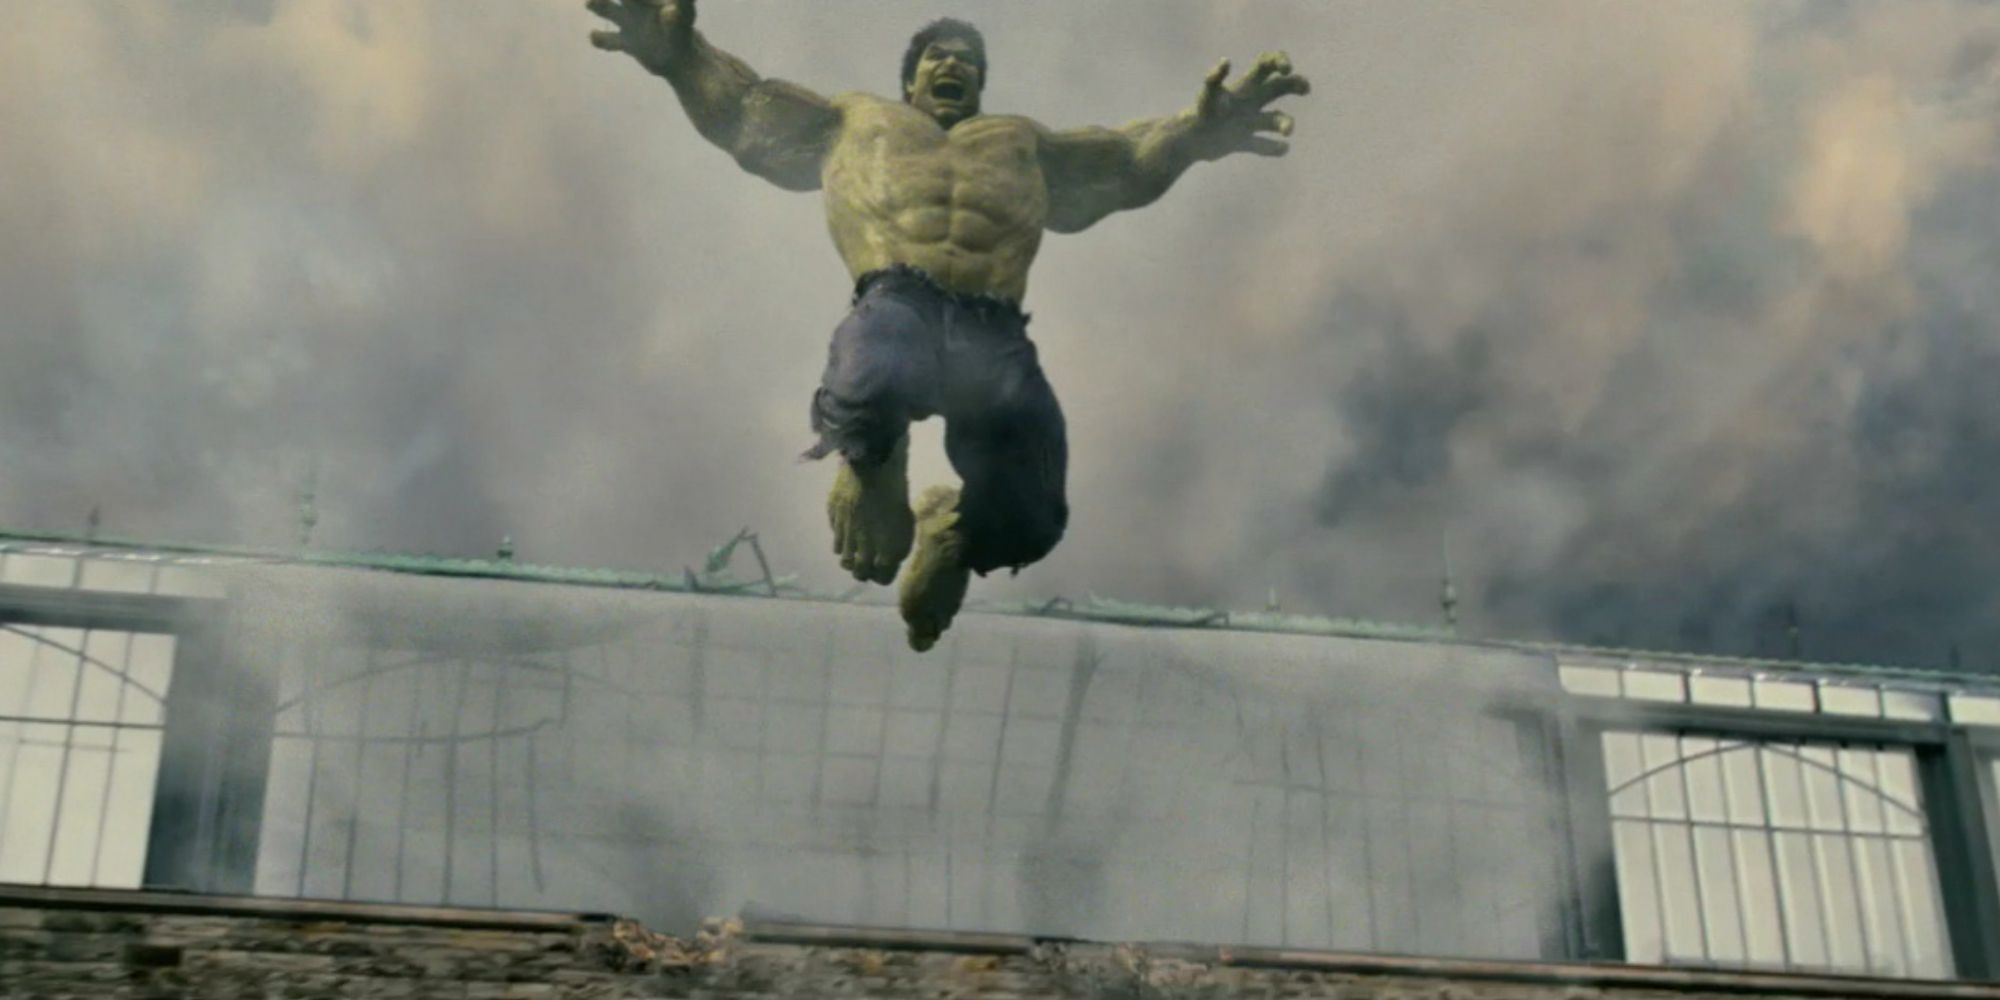 The Hulk leaps over buildings in 2008's The Incredible Hulk